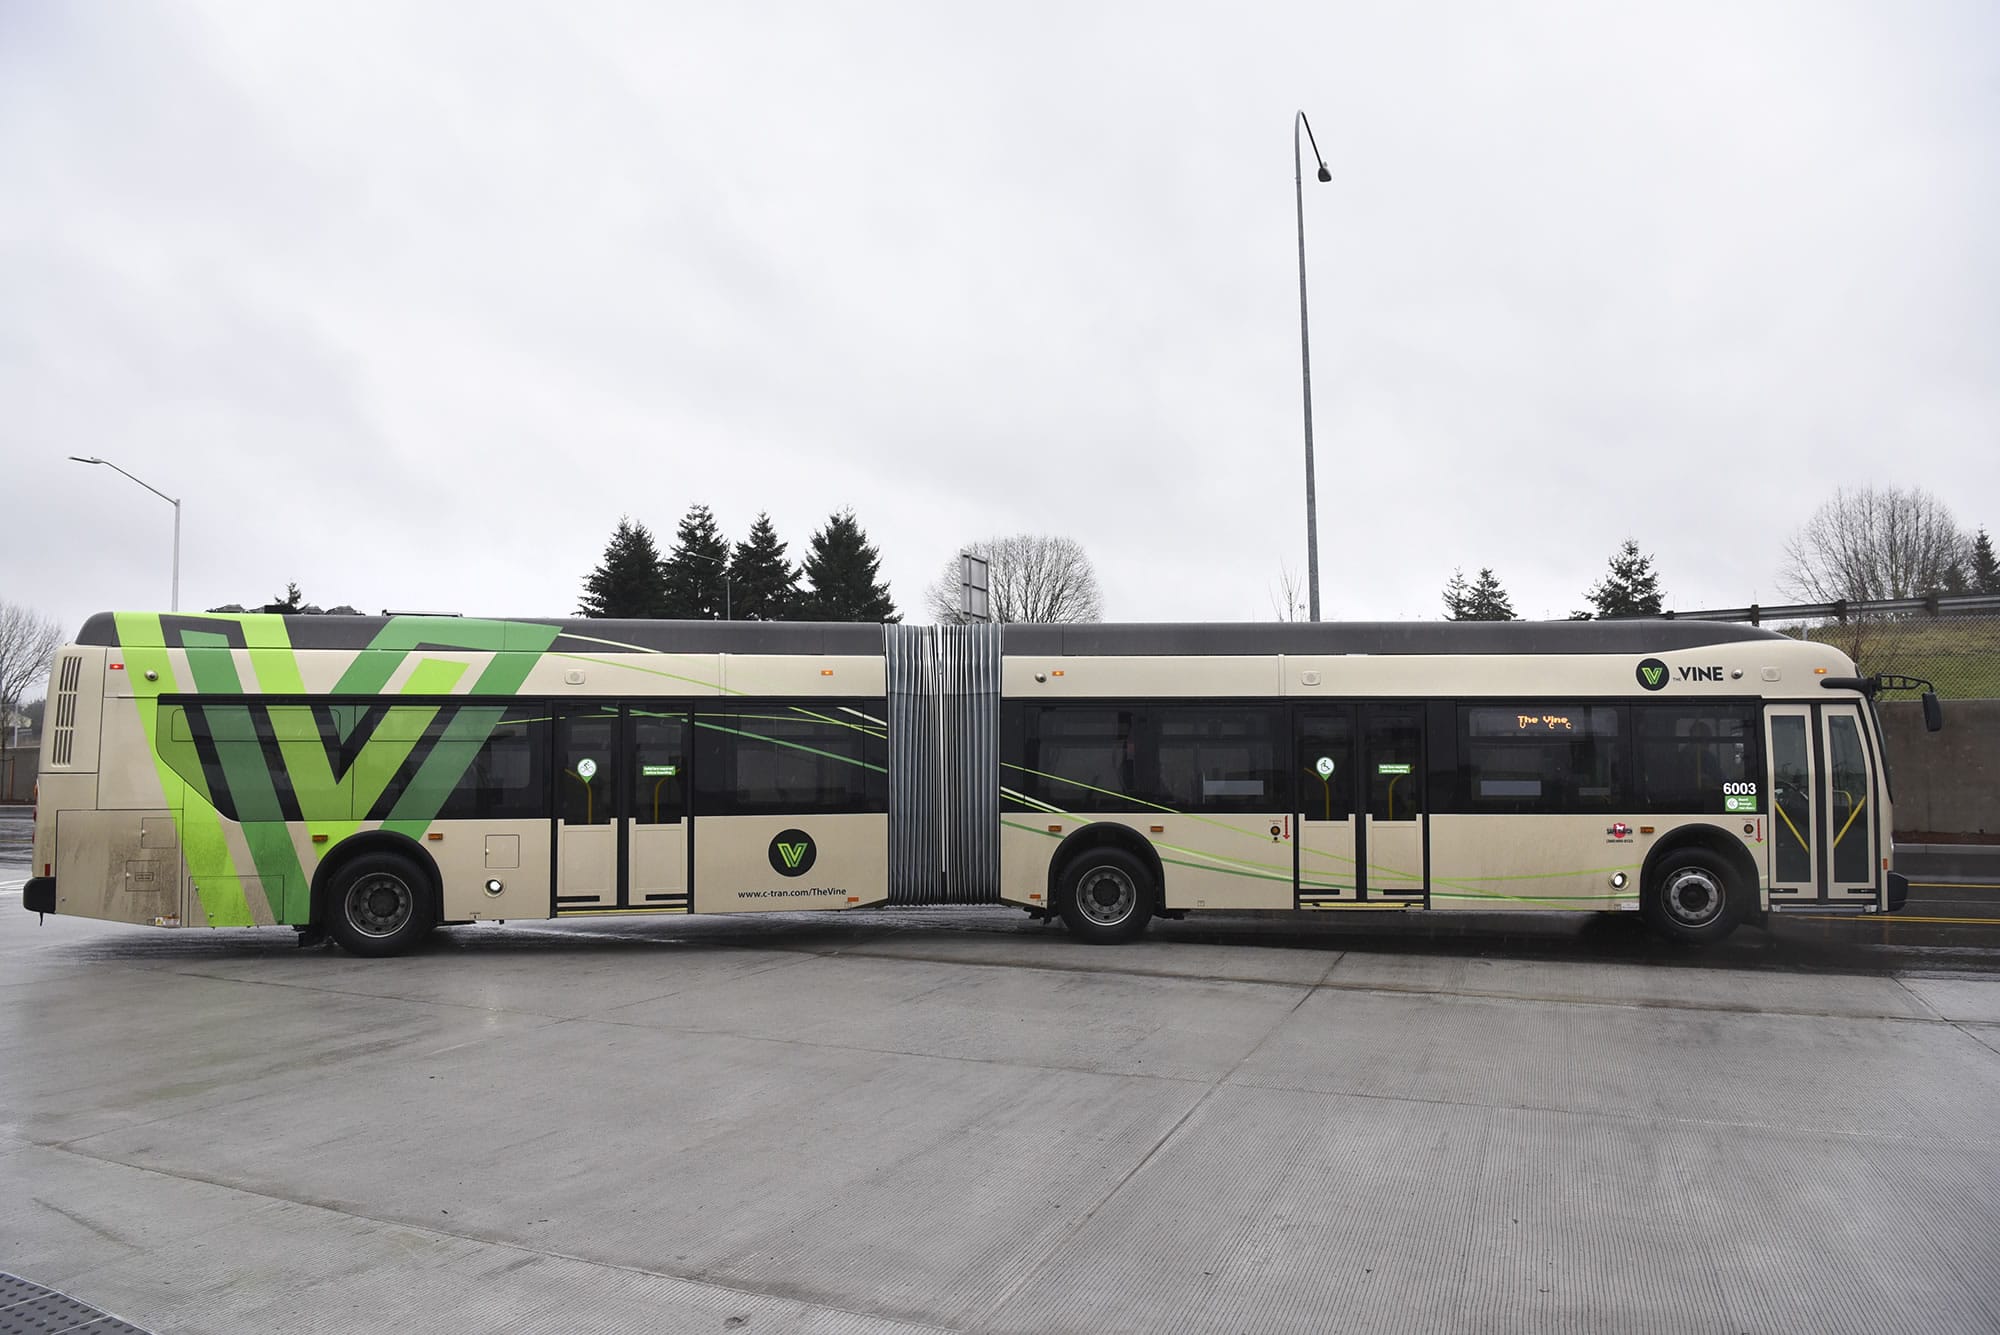 One of The Vine buses leaves Vancouver Mall in January 2017. C-Tran replaced two 40-foot buses on Route 164 with two new 60-foot articulated buses like those that currently operate on The Vine in the Fourth Plain corridor.